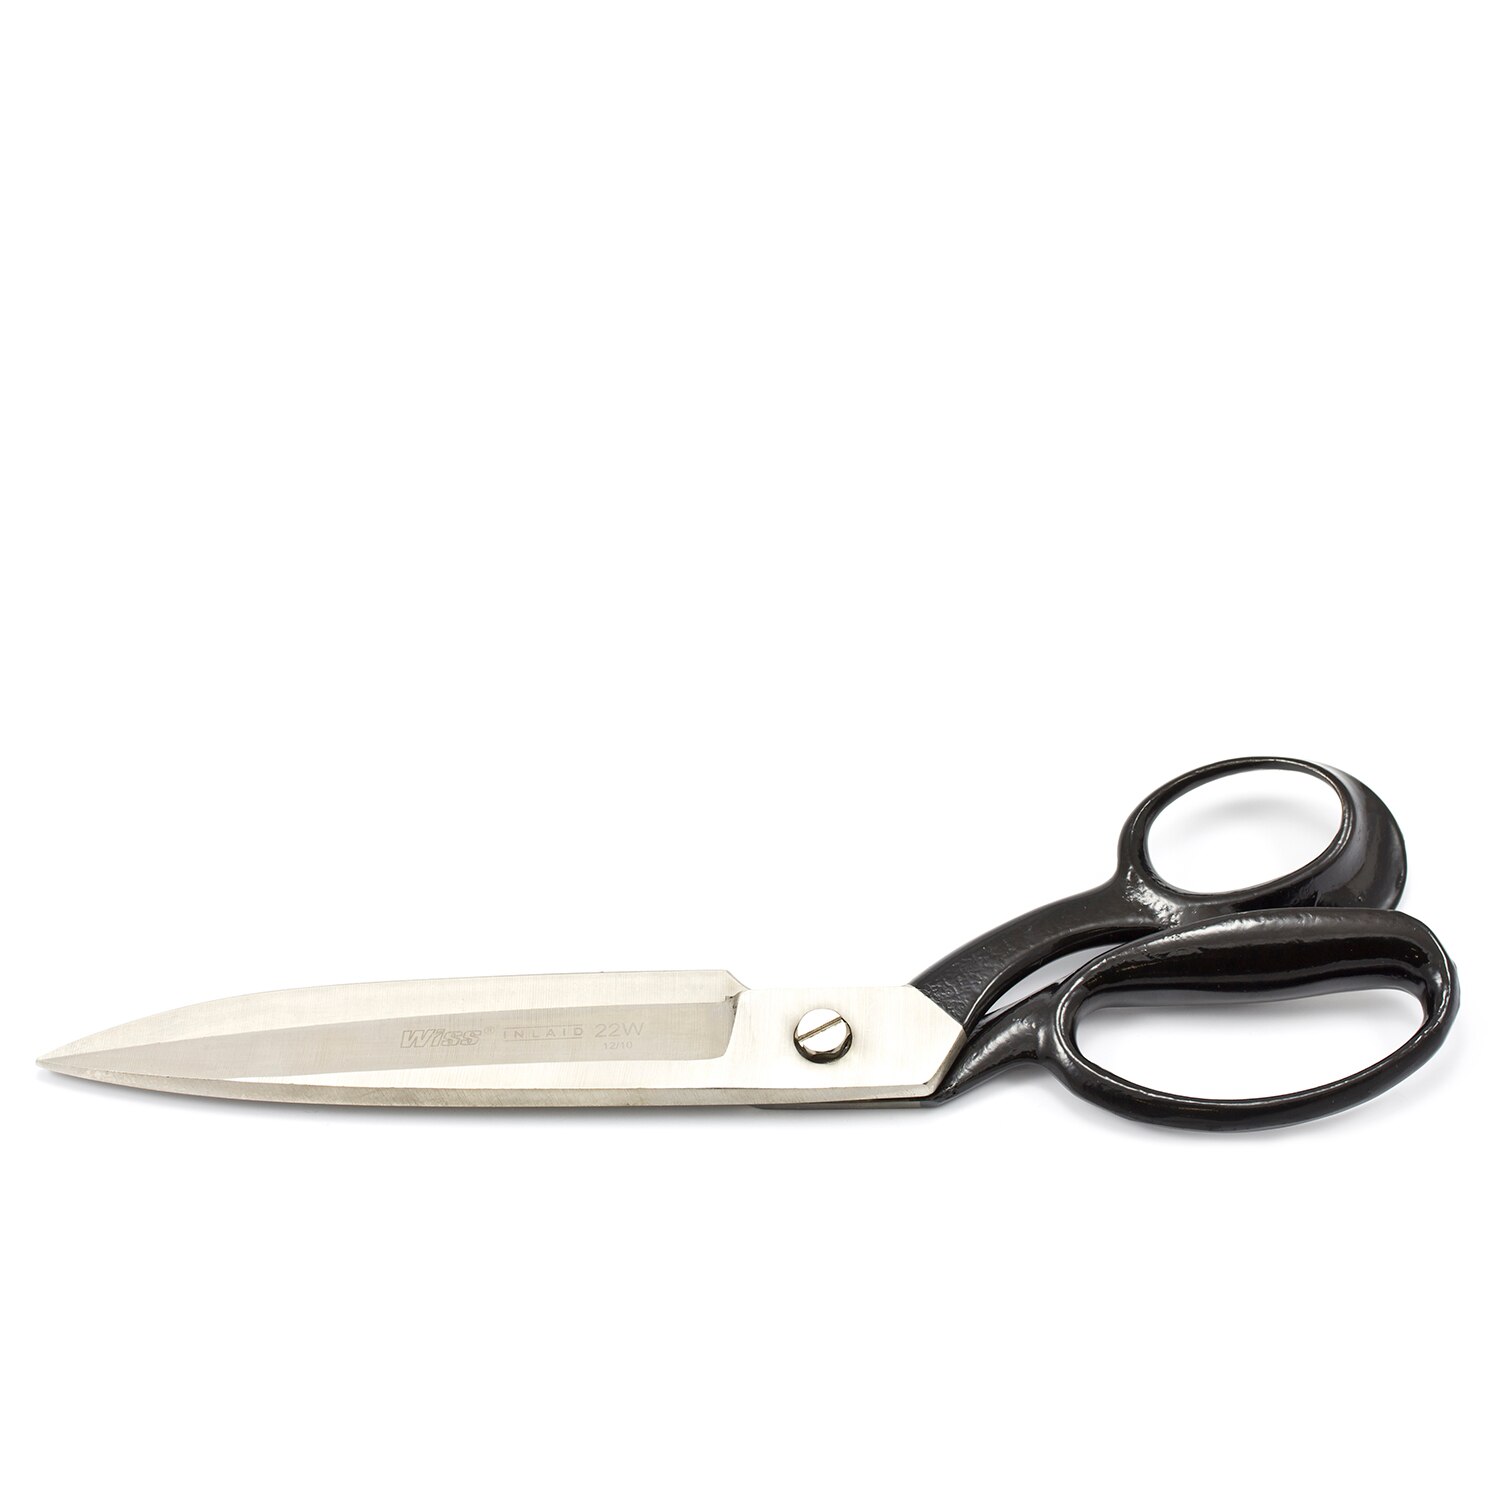 Upholstery Supplies - SSI1-DS Scissors - Wiss Auto Body Shears, 8 (01)  (EACH)